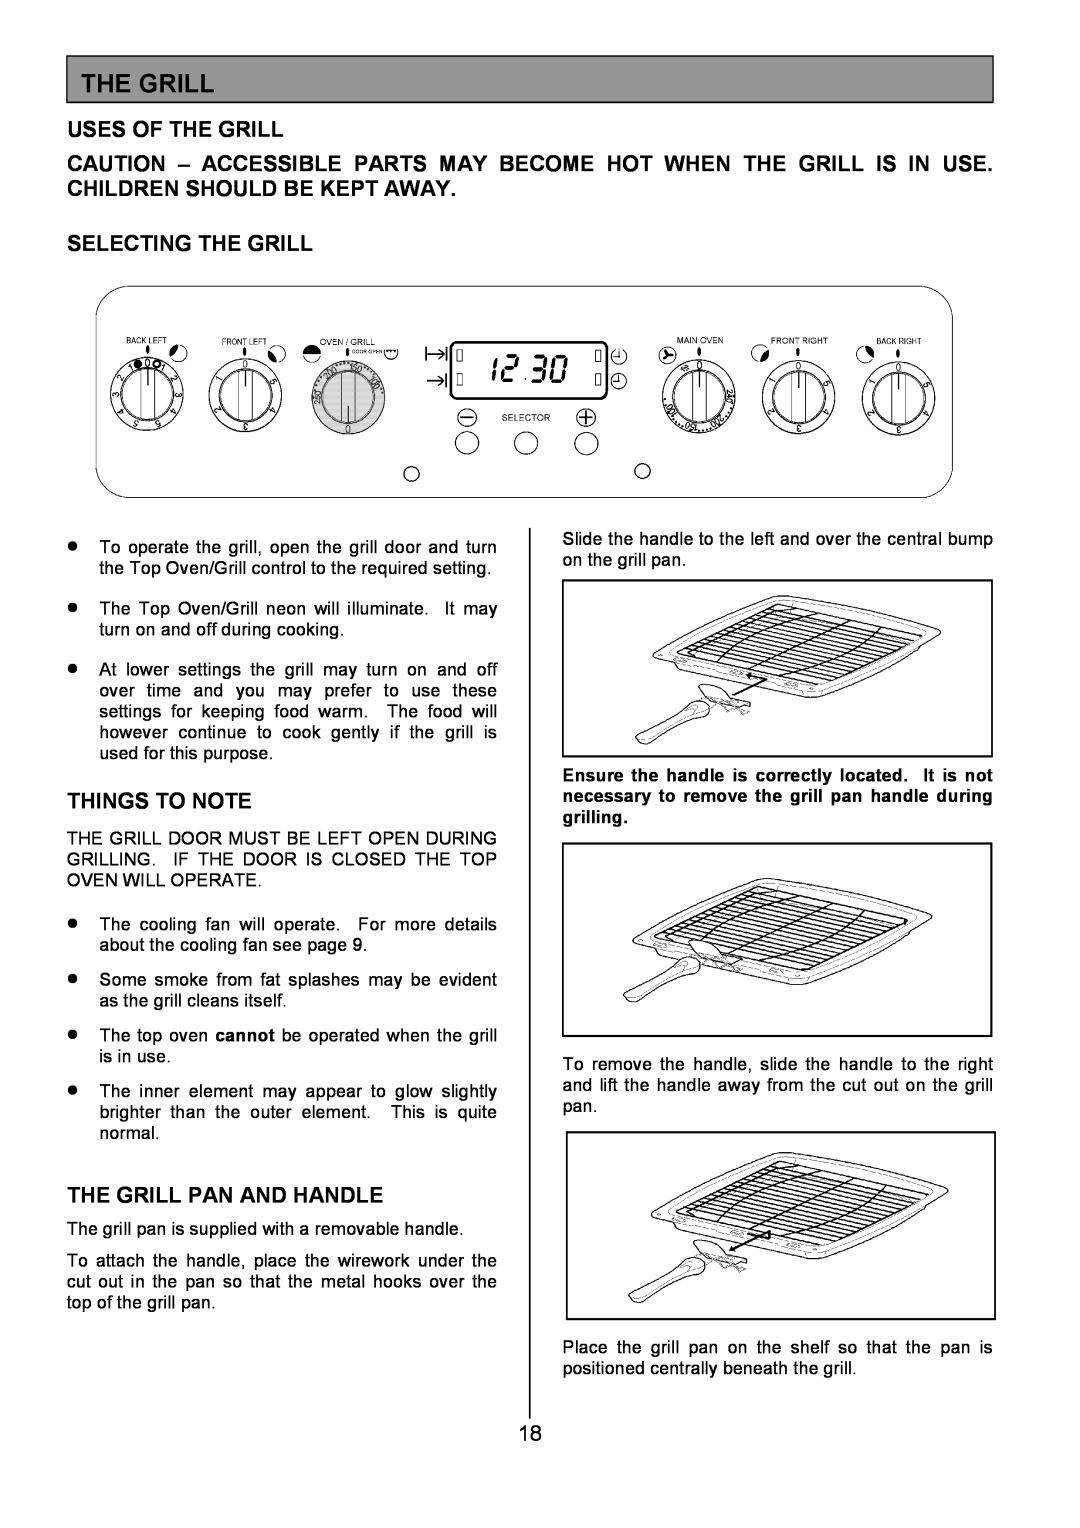 Tricity Bendix SIE556 Uses Of The Grill, Selecting The Grill, Things To Note, The Grill Pan And Handle 